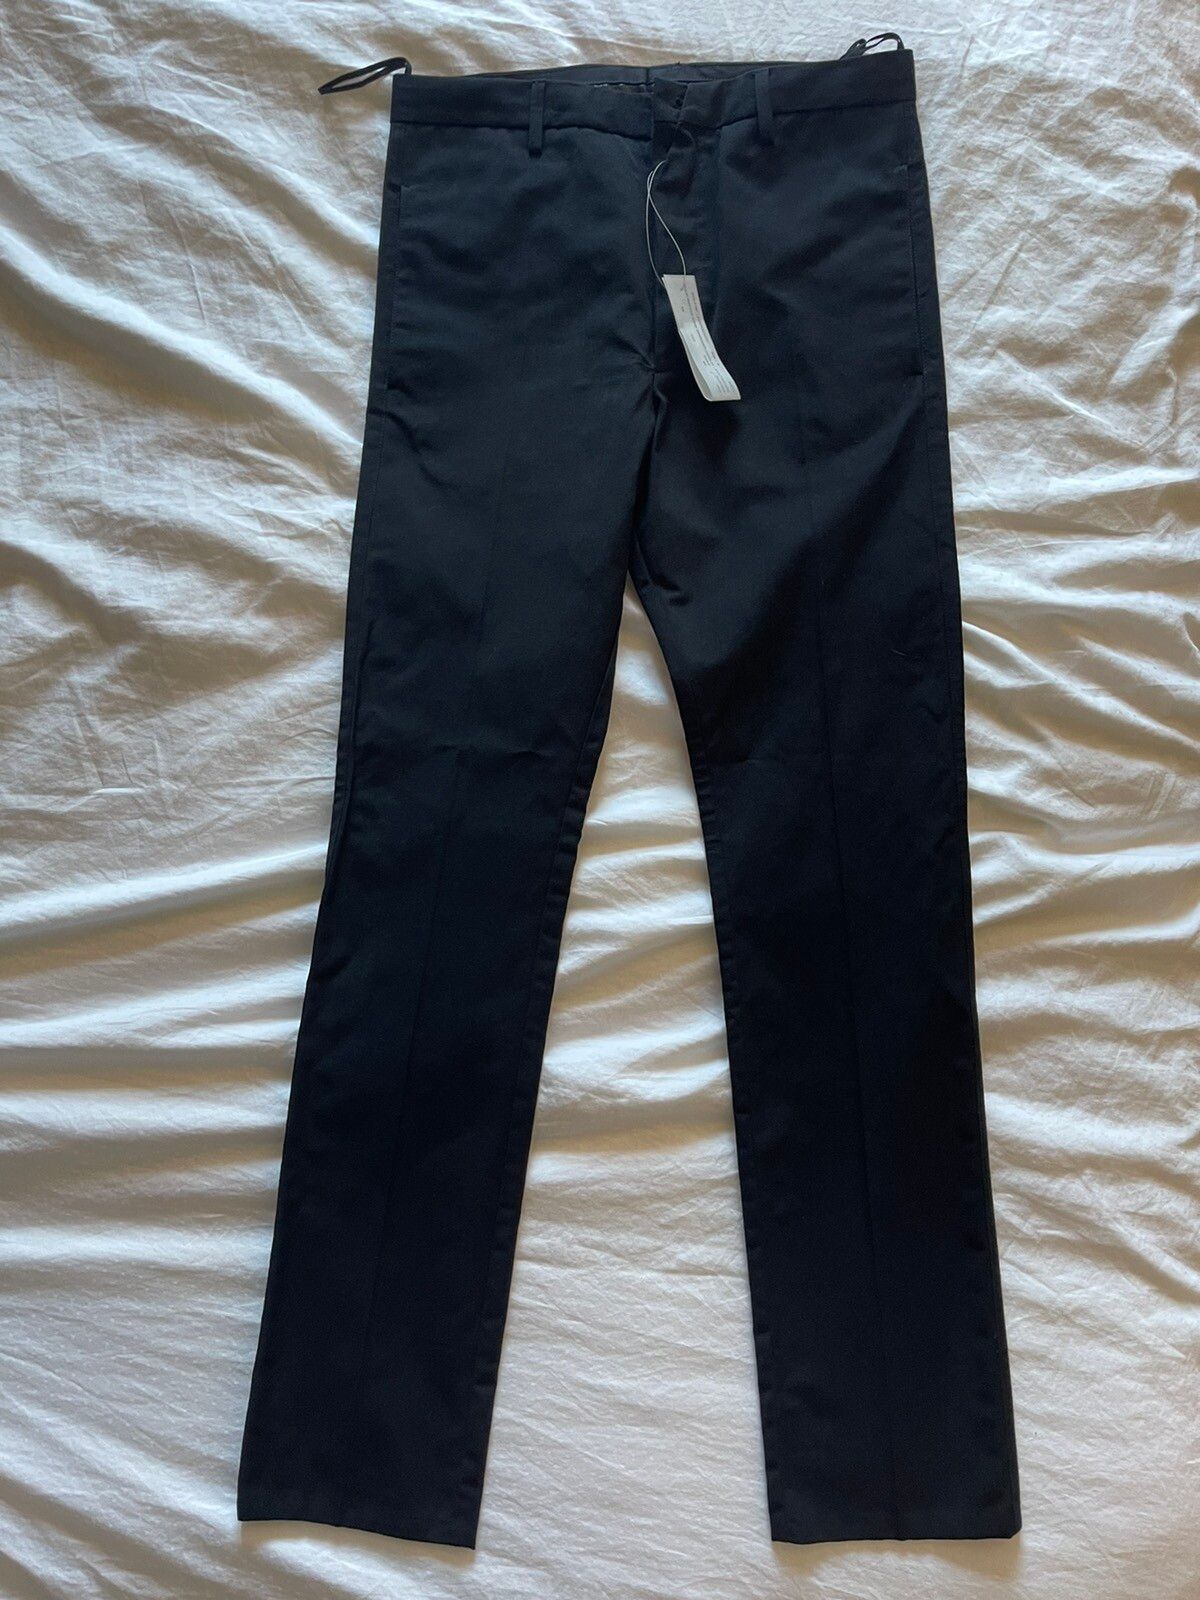 Carol Christian Poell Deepti Trousers | Grailed